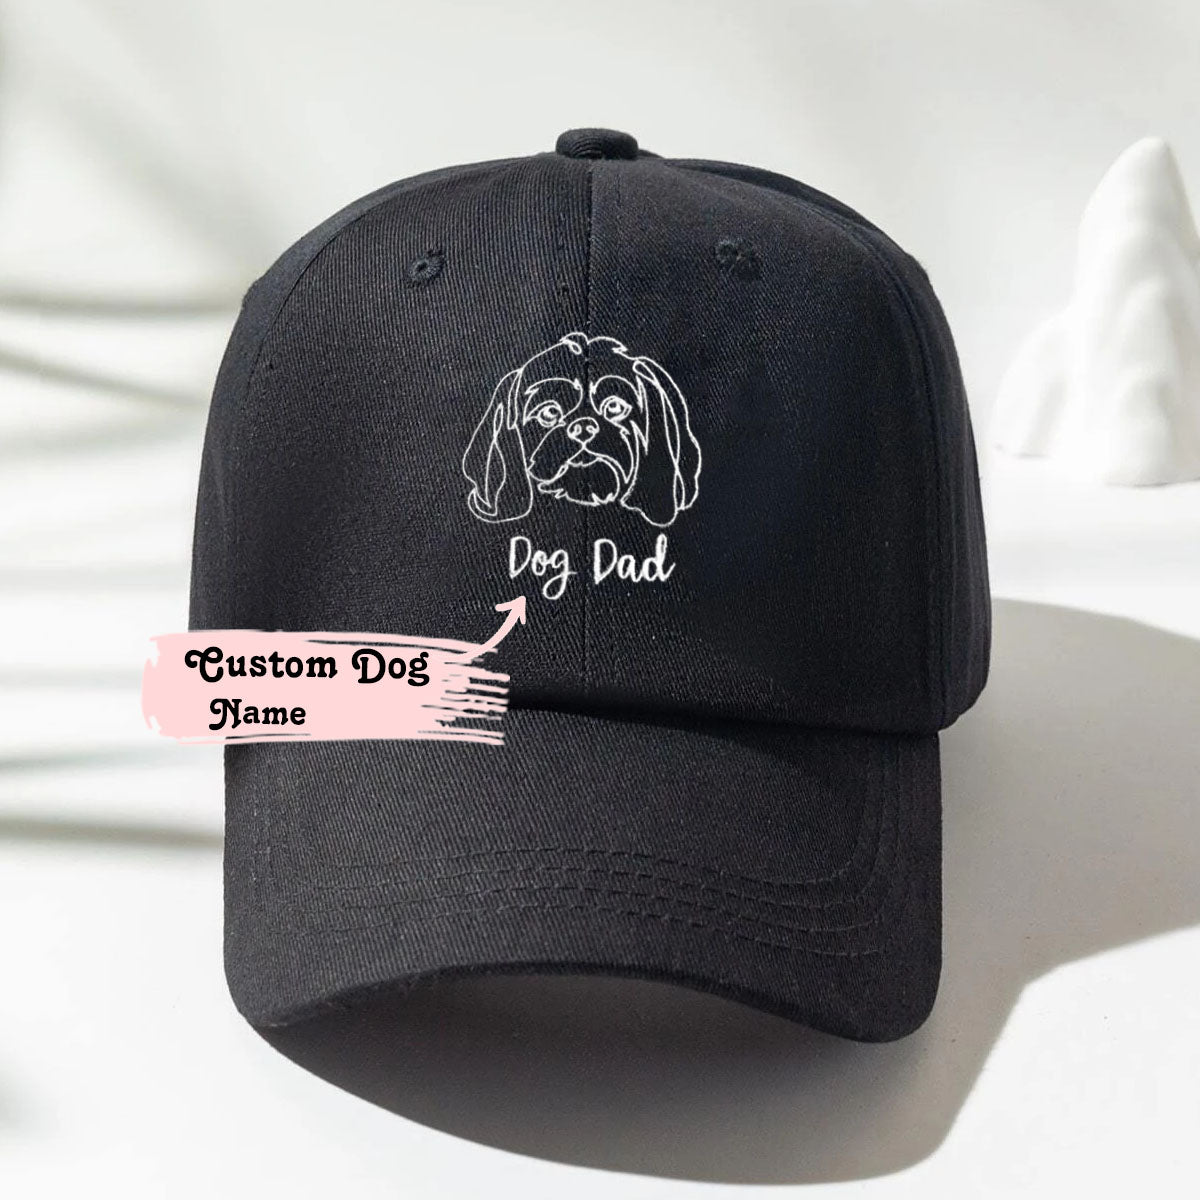 Personalized Shih Tzu Dog Dad Embroidered Hat, Custom Hat with Dog Name, Best Gifts For Shih Tzu Lovers